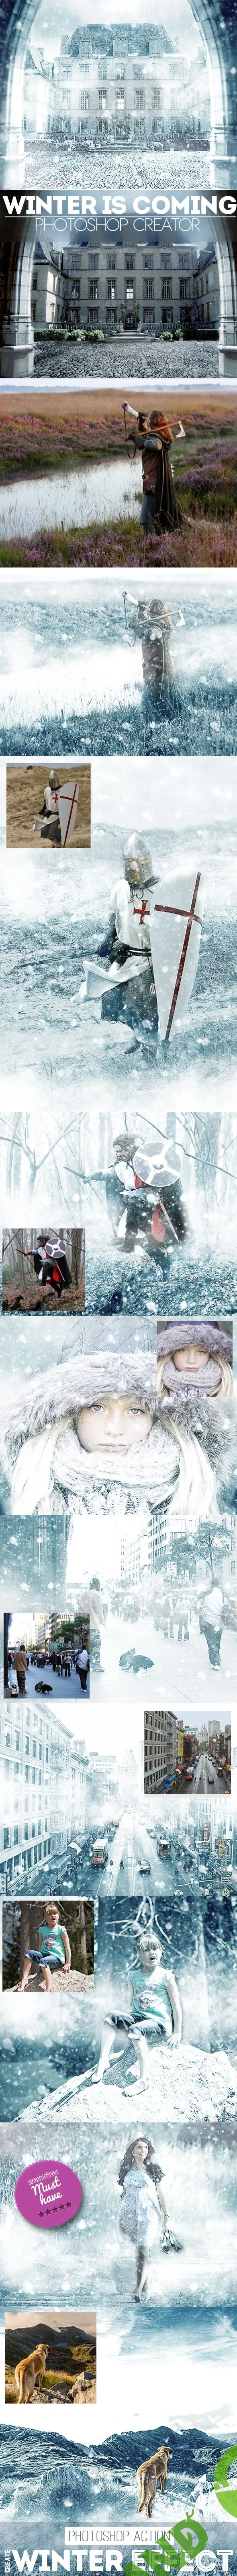 [Graphicriver] Photoshop Actions - Winter is Coming Photoshop Snowing Effect